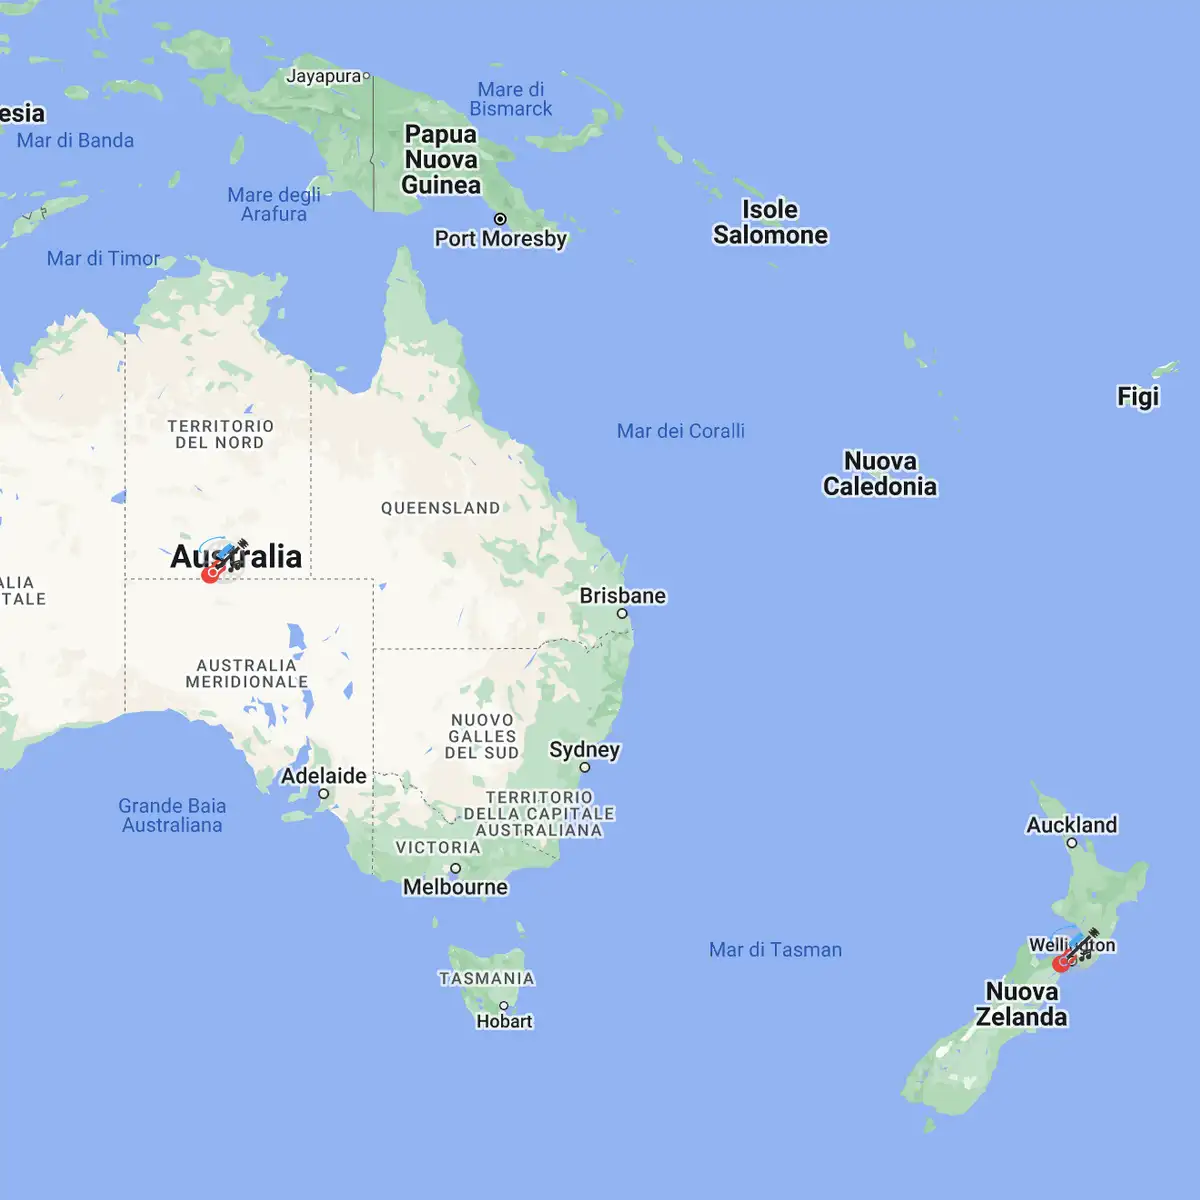 Bruce_Springsteen_mappa_oceania_app_bruce_concerts